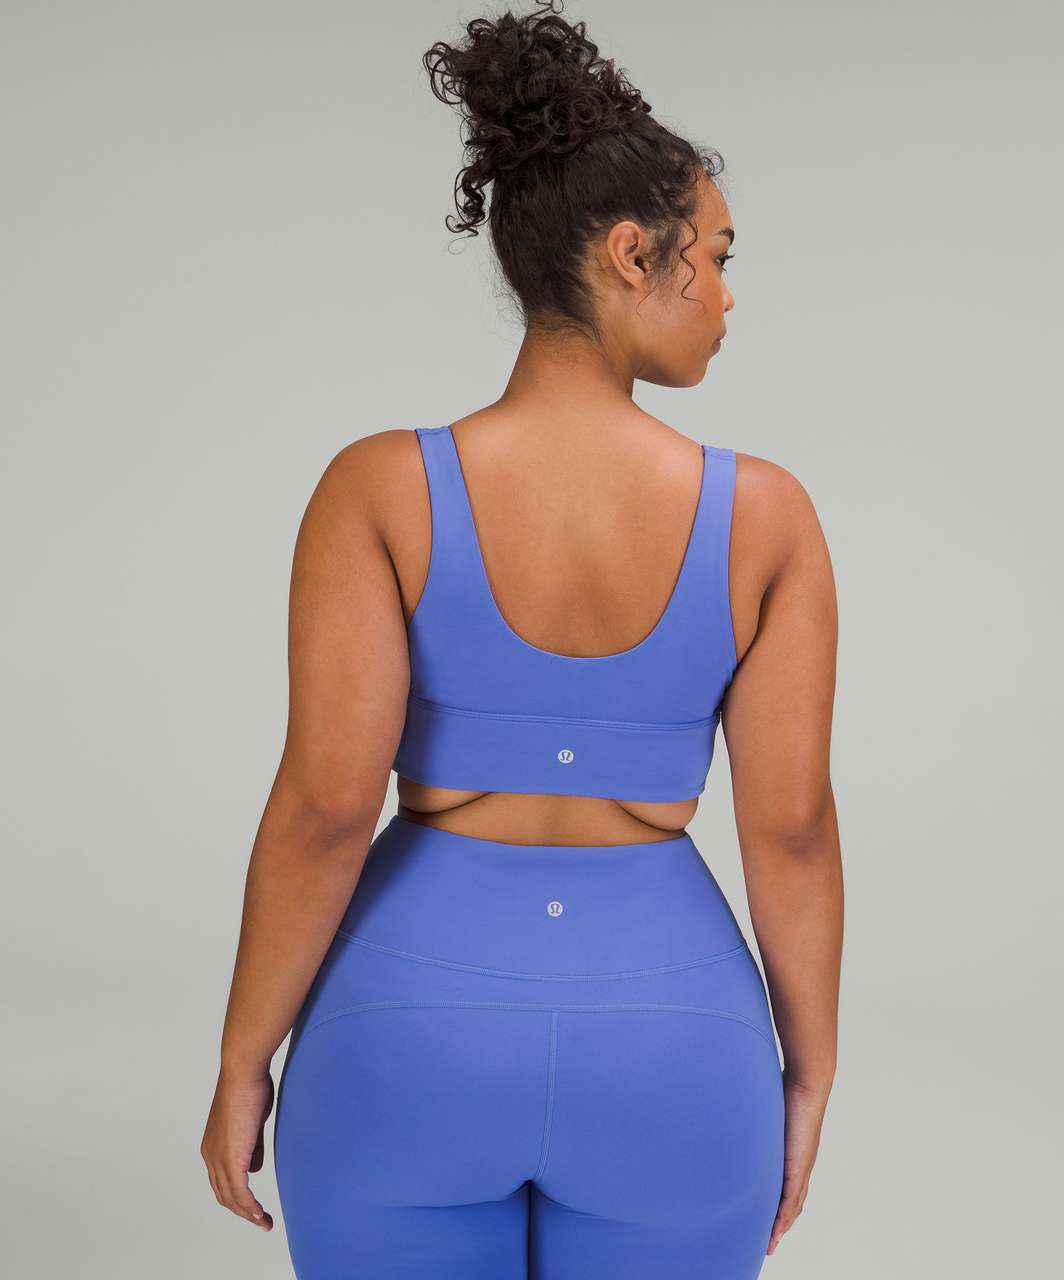 Any light support bra recommendations for a 32D/ Size 4? : r/lululemon